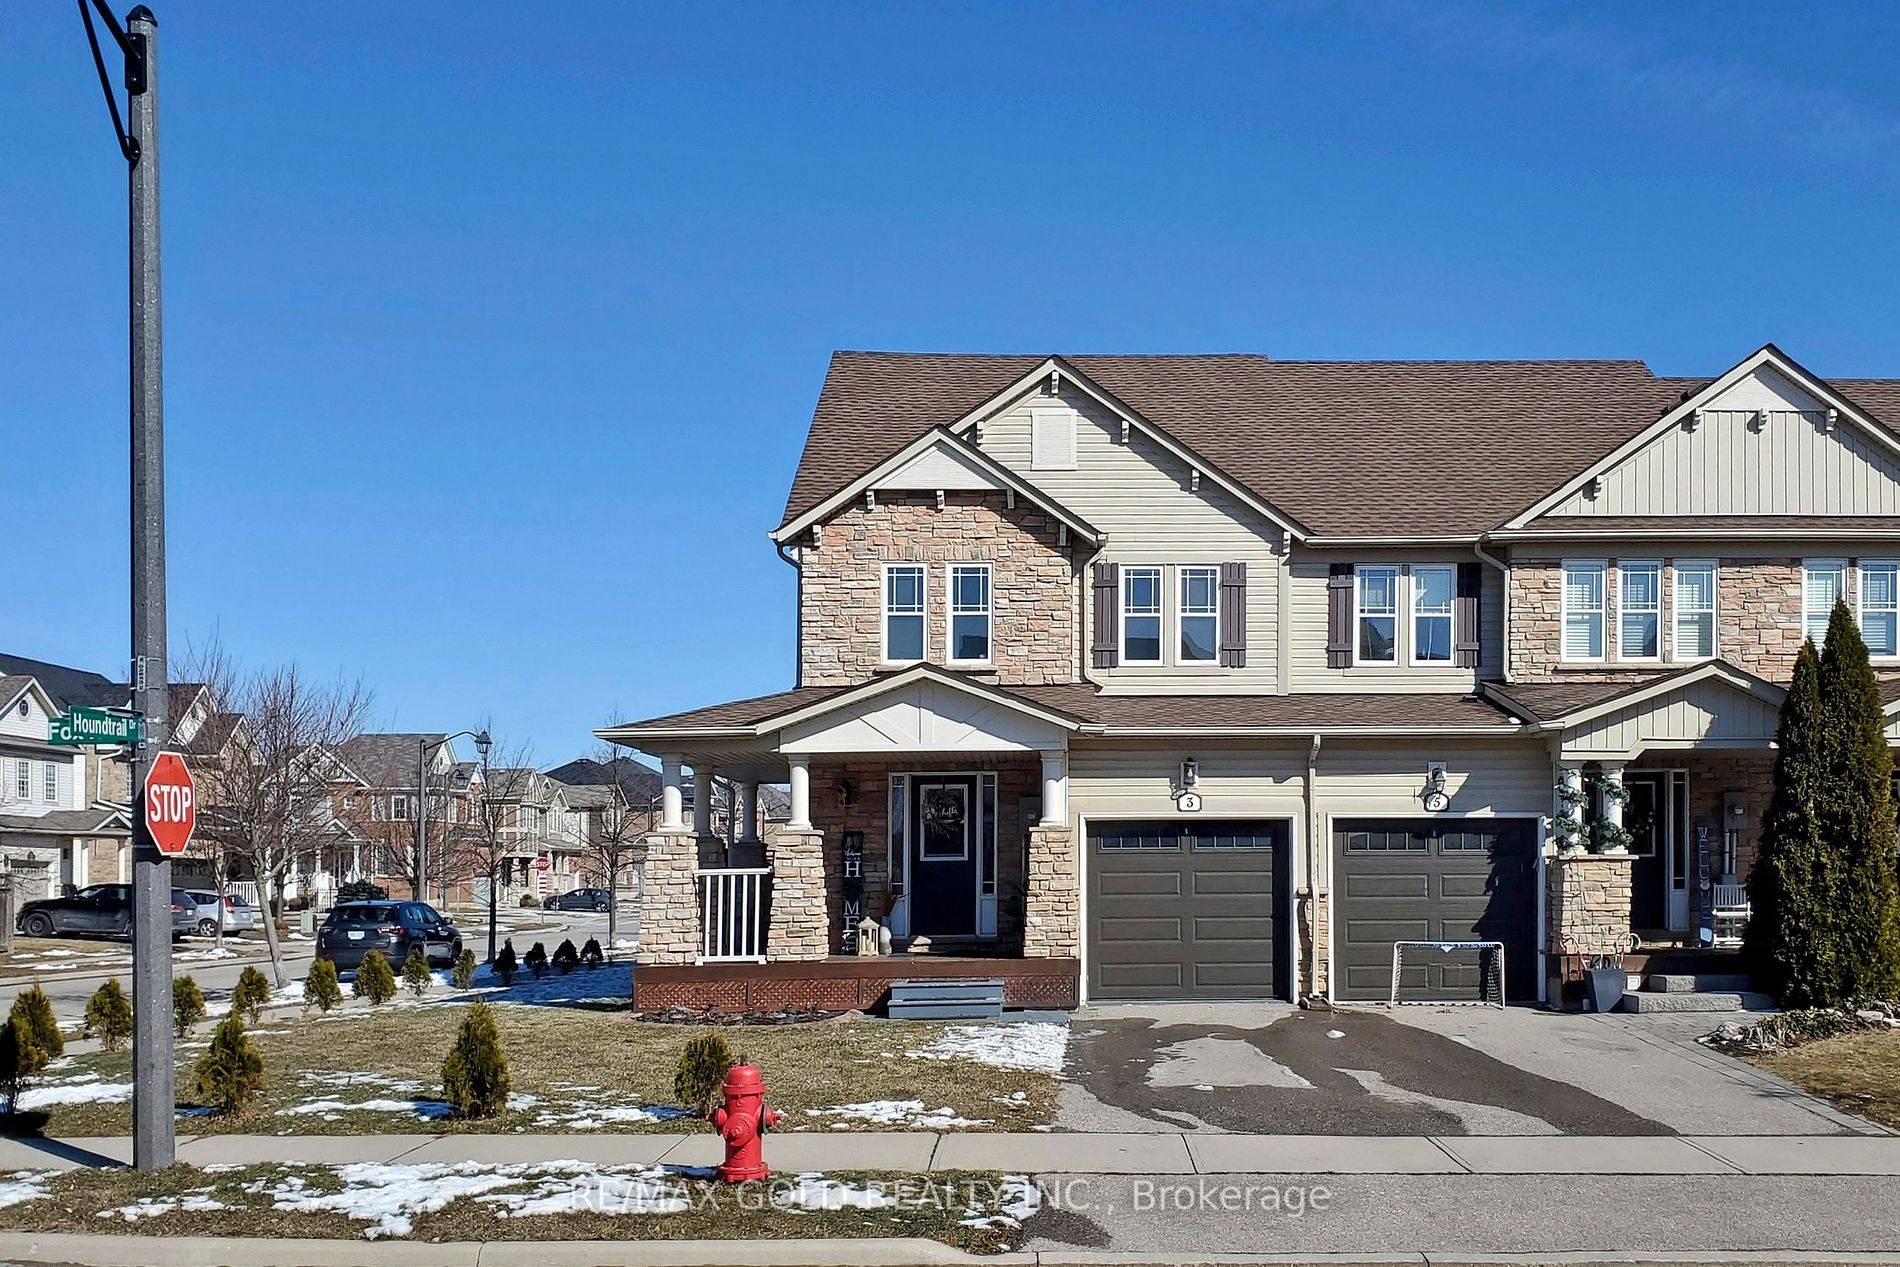 Welcome to this gorgeous 4 bedroom Turn key home located in a prime location !